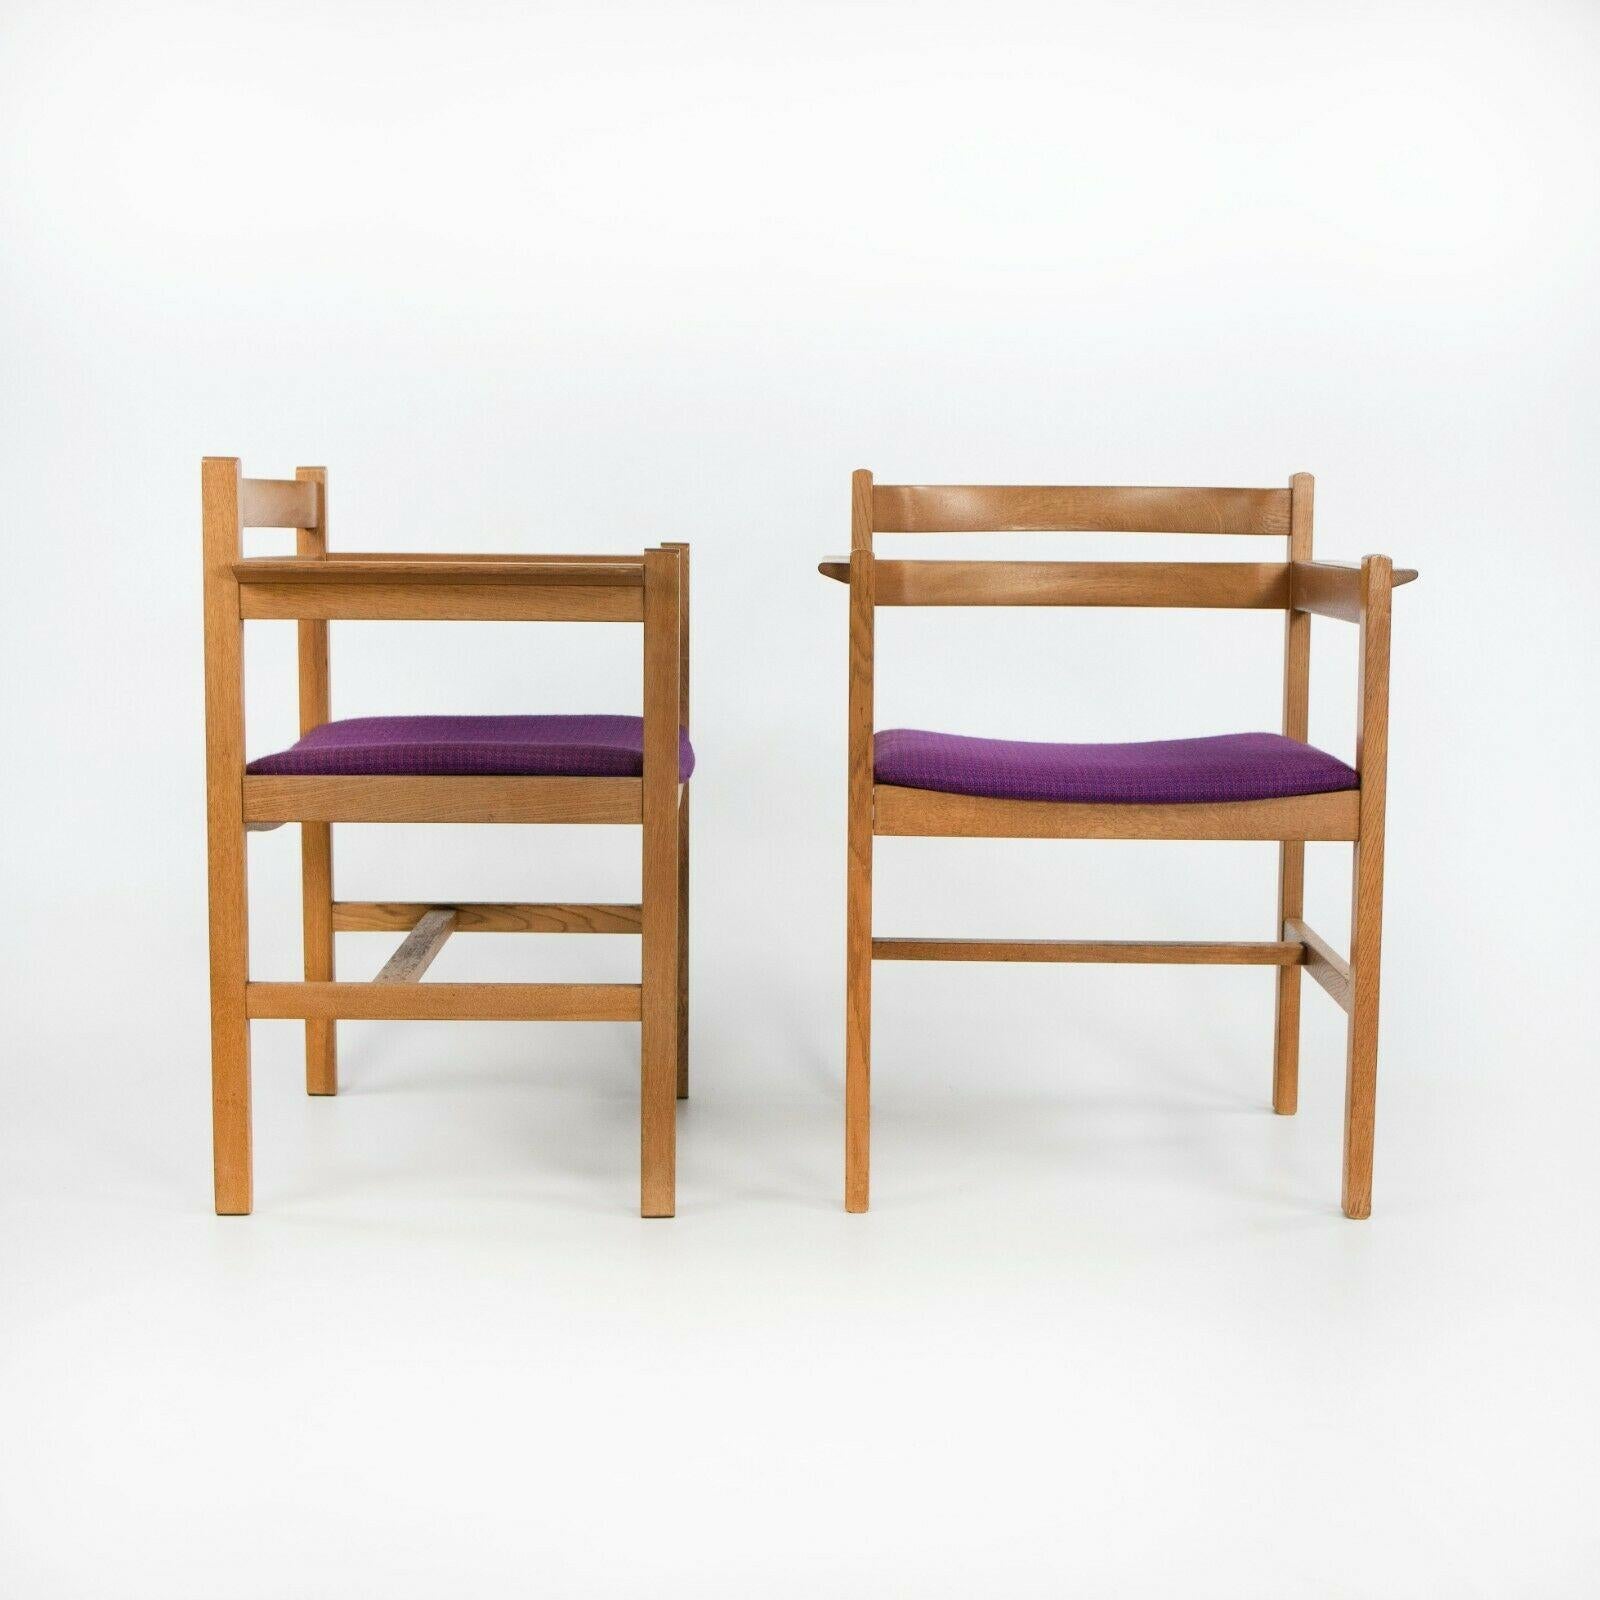 Listed for sale is a circa 1975 production set of Asserbo dining chairs designed by Borge Mogensen and produced by CI designs. CI designs was an authorized manufacturer for Borge Mogensen and was based in Boston, Massachusetts. The chairs were